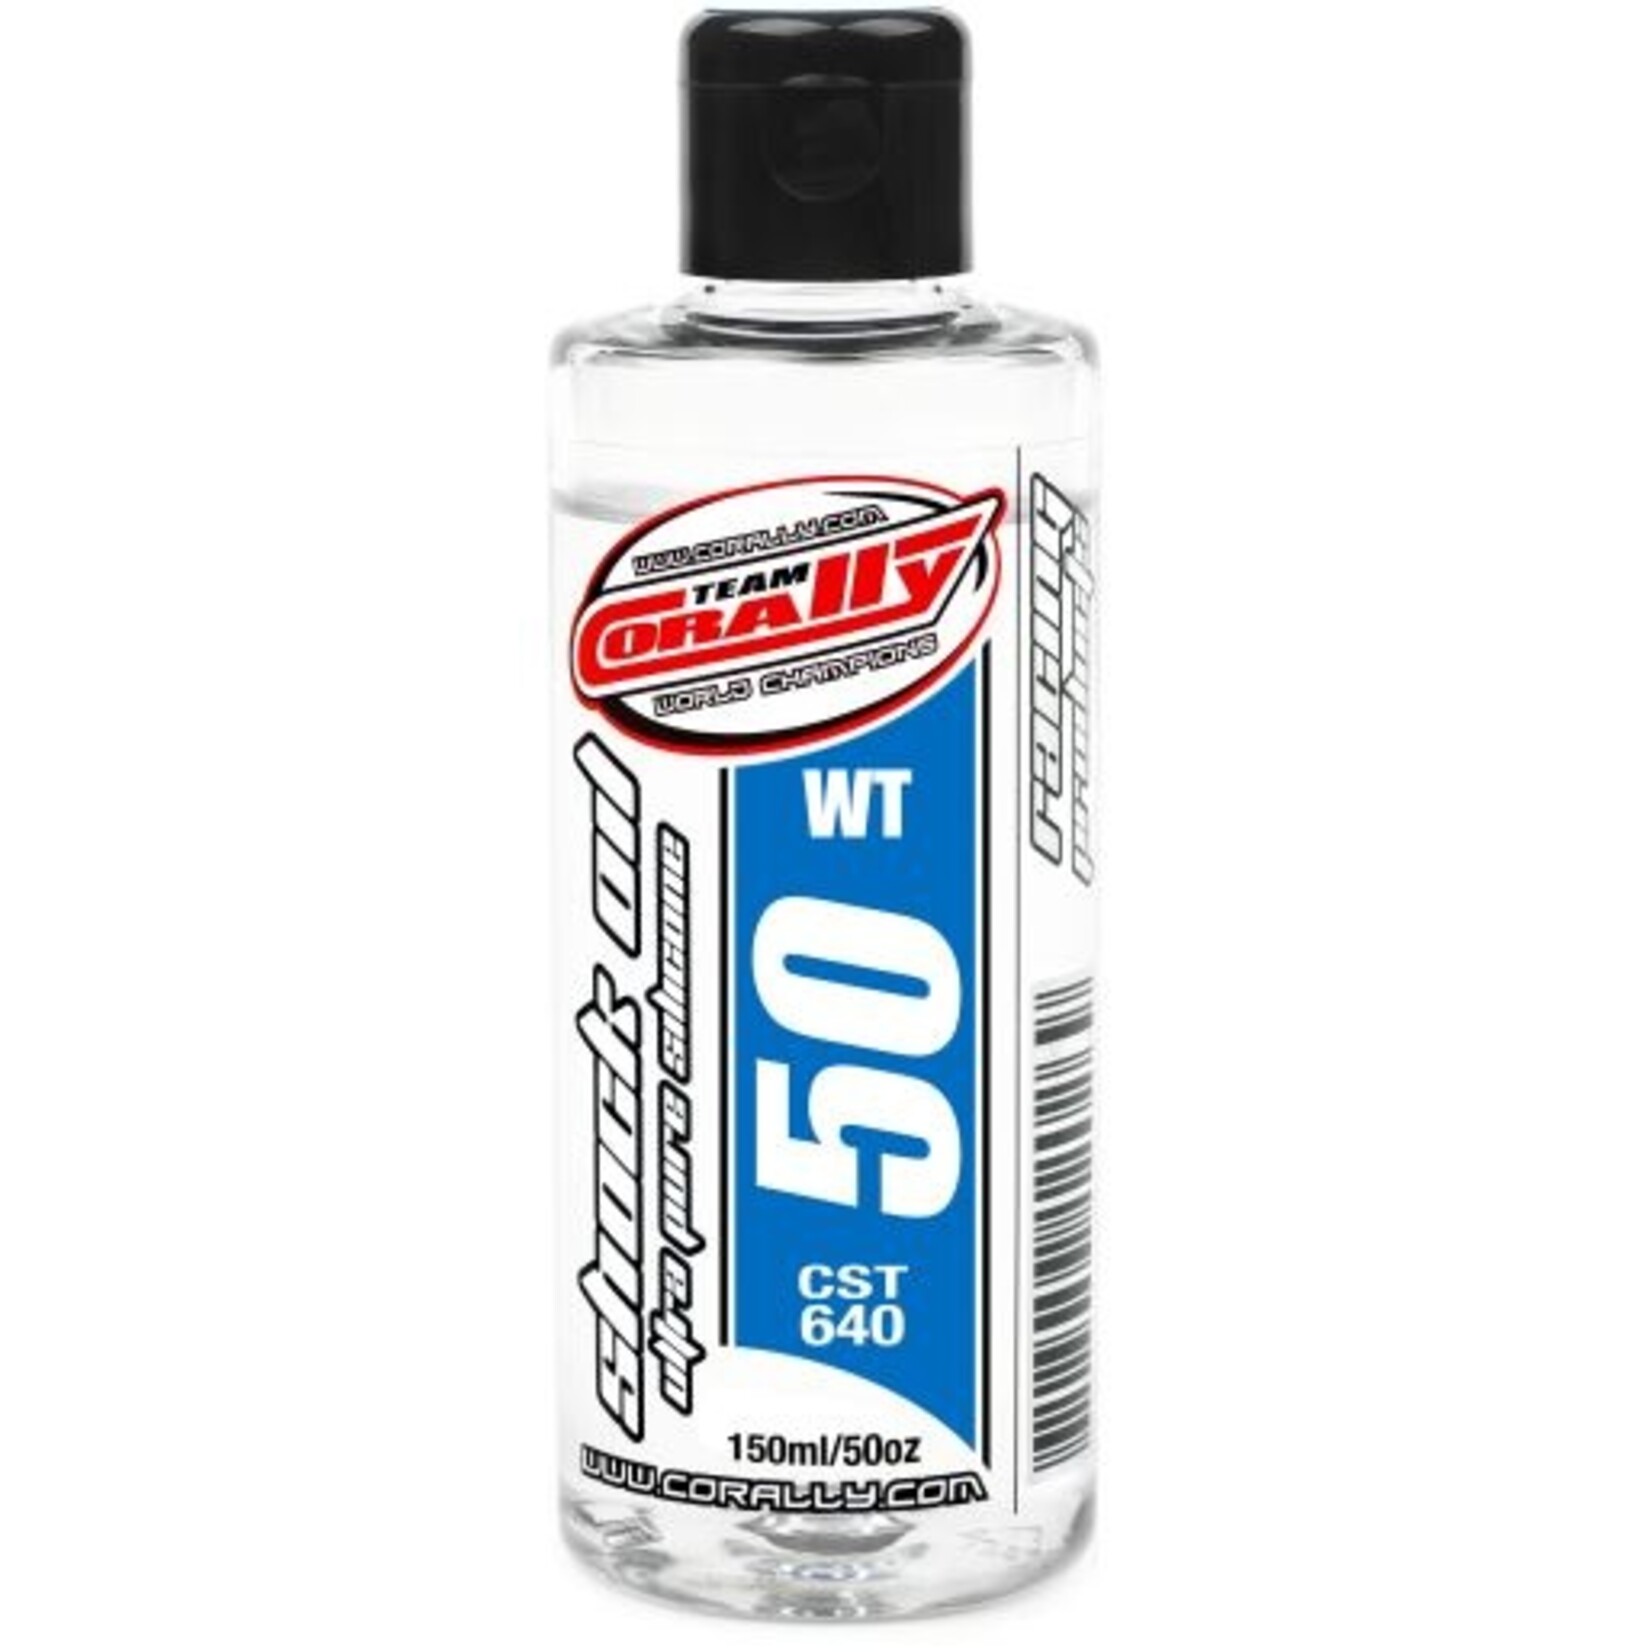 Corally (Team Corally) Ultra Pure Silicone Shock Oil - 50 WT - 150ml